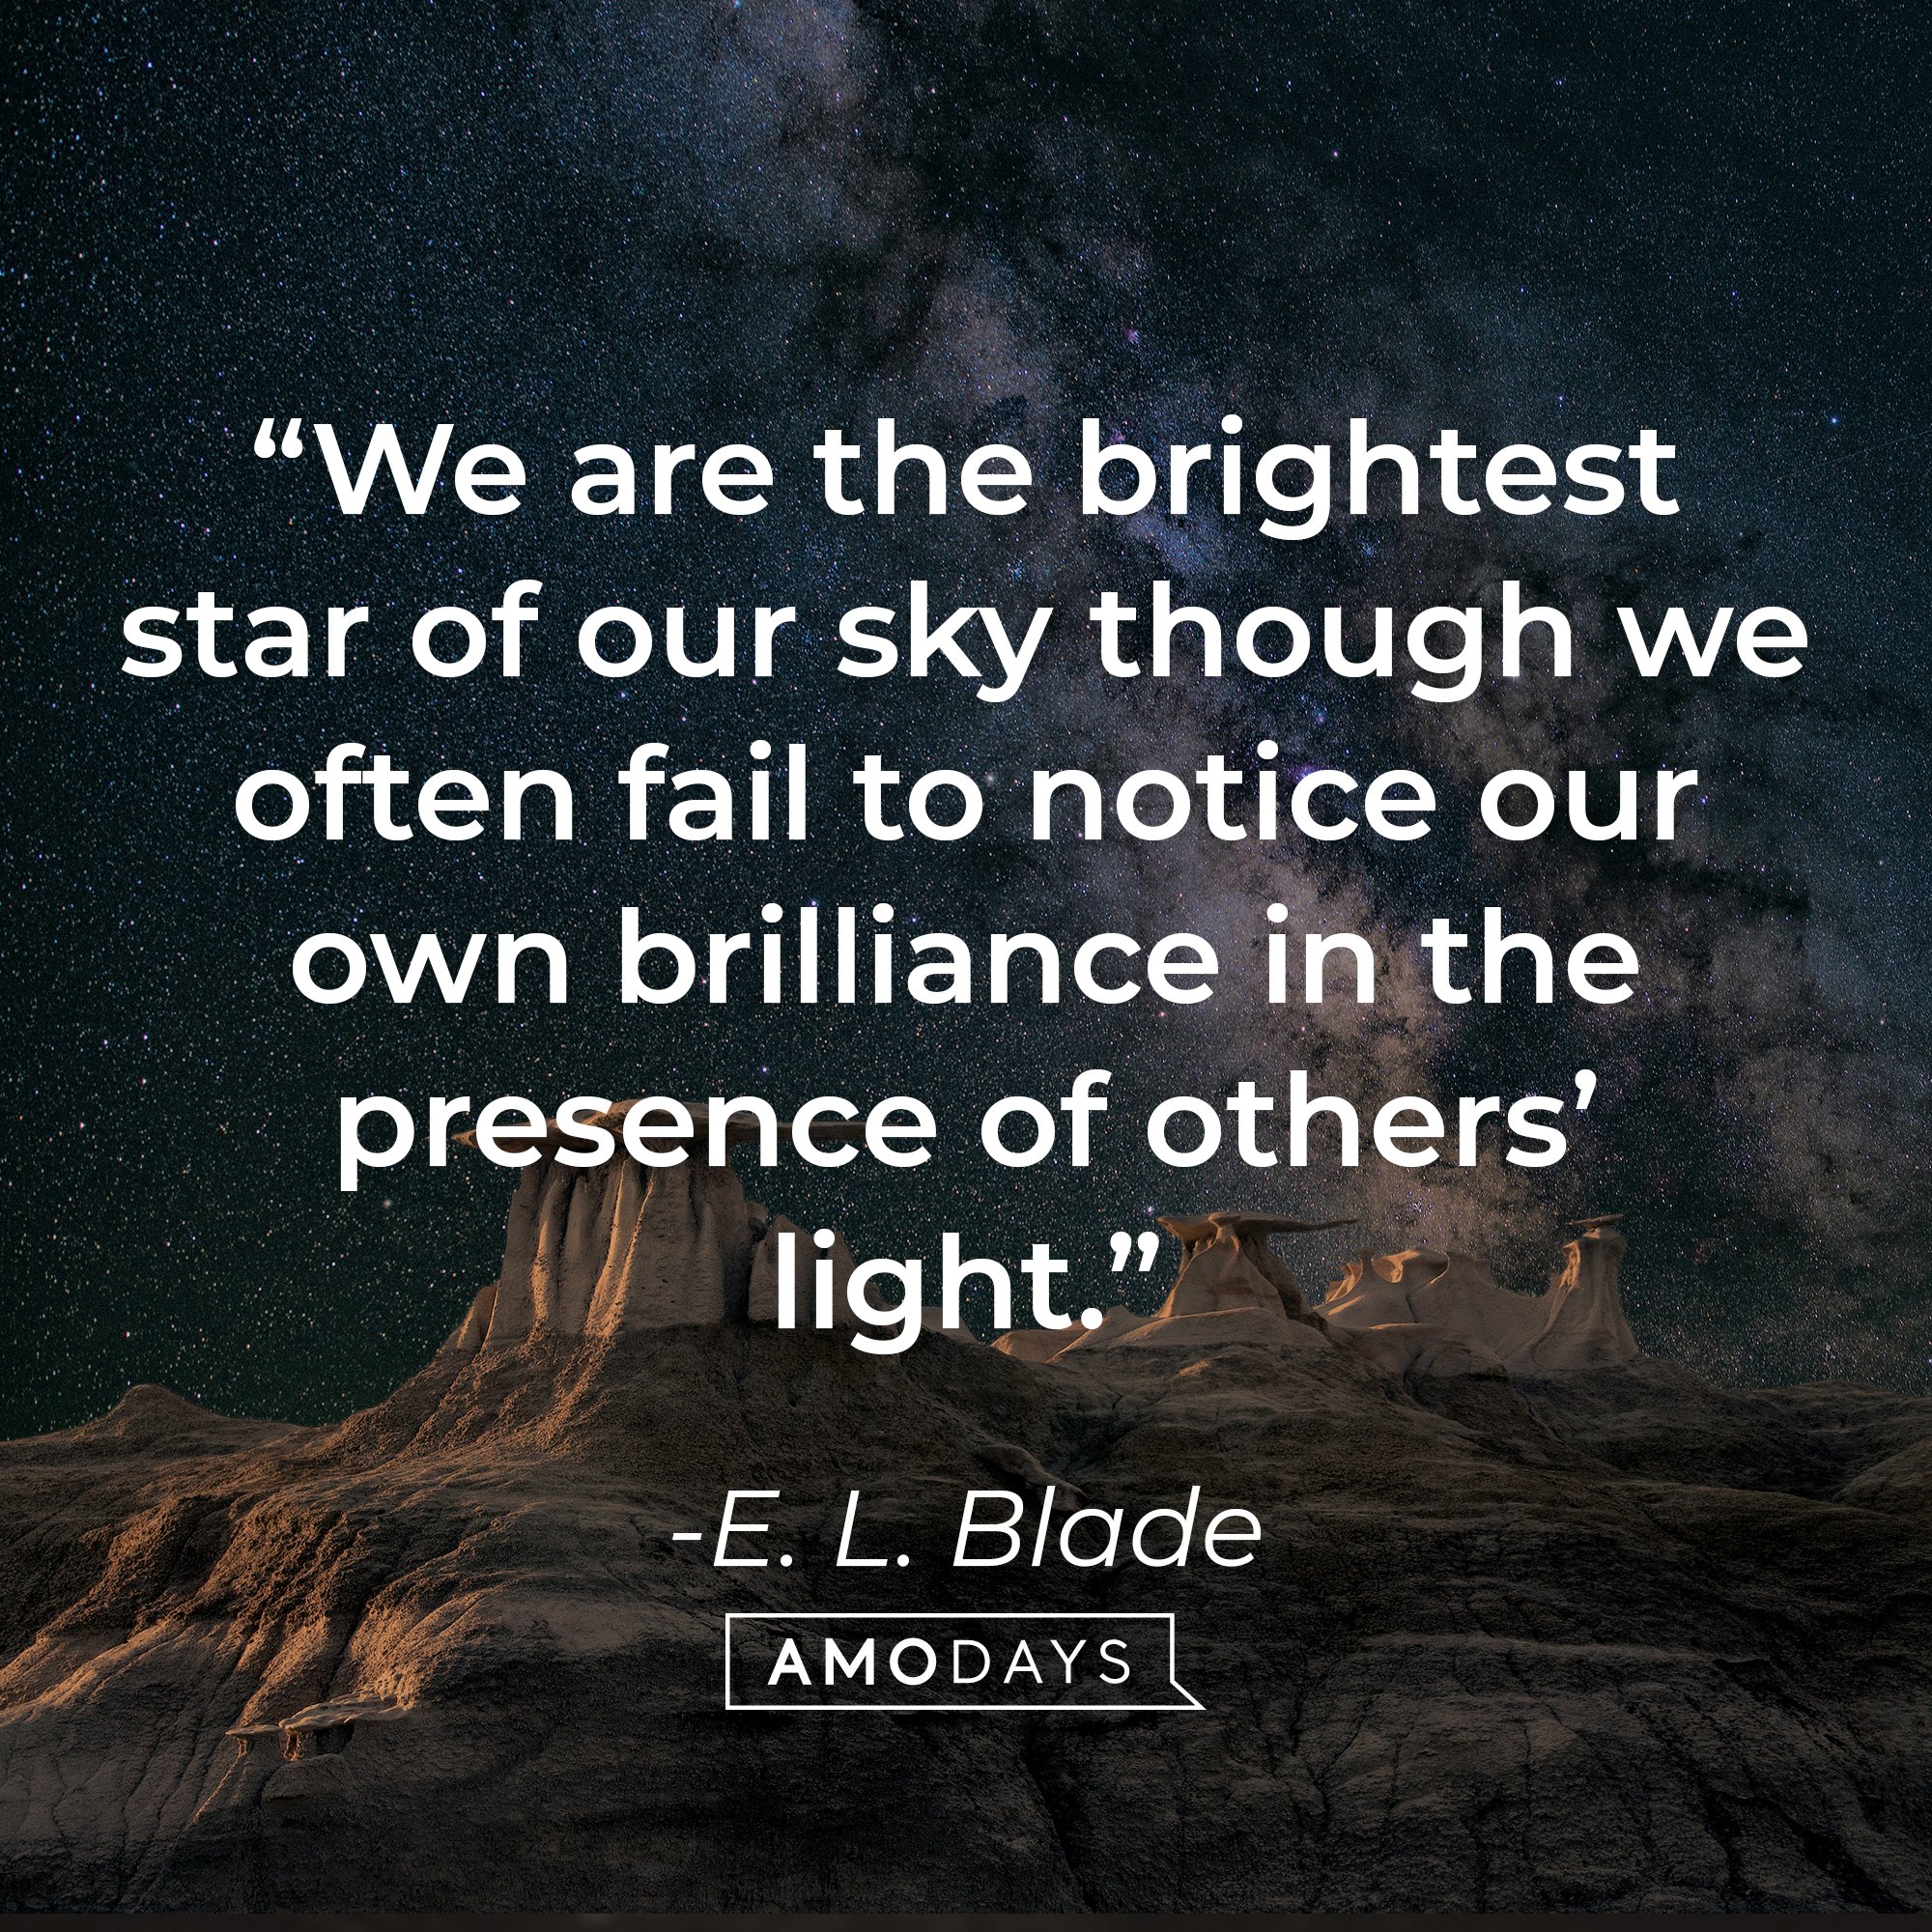 E. L. Blade's quote: “We are the brightest star of our sky though we often fail to notice our own brilliance in the presence of others’ light.” | Image: AmoDays